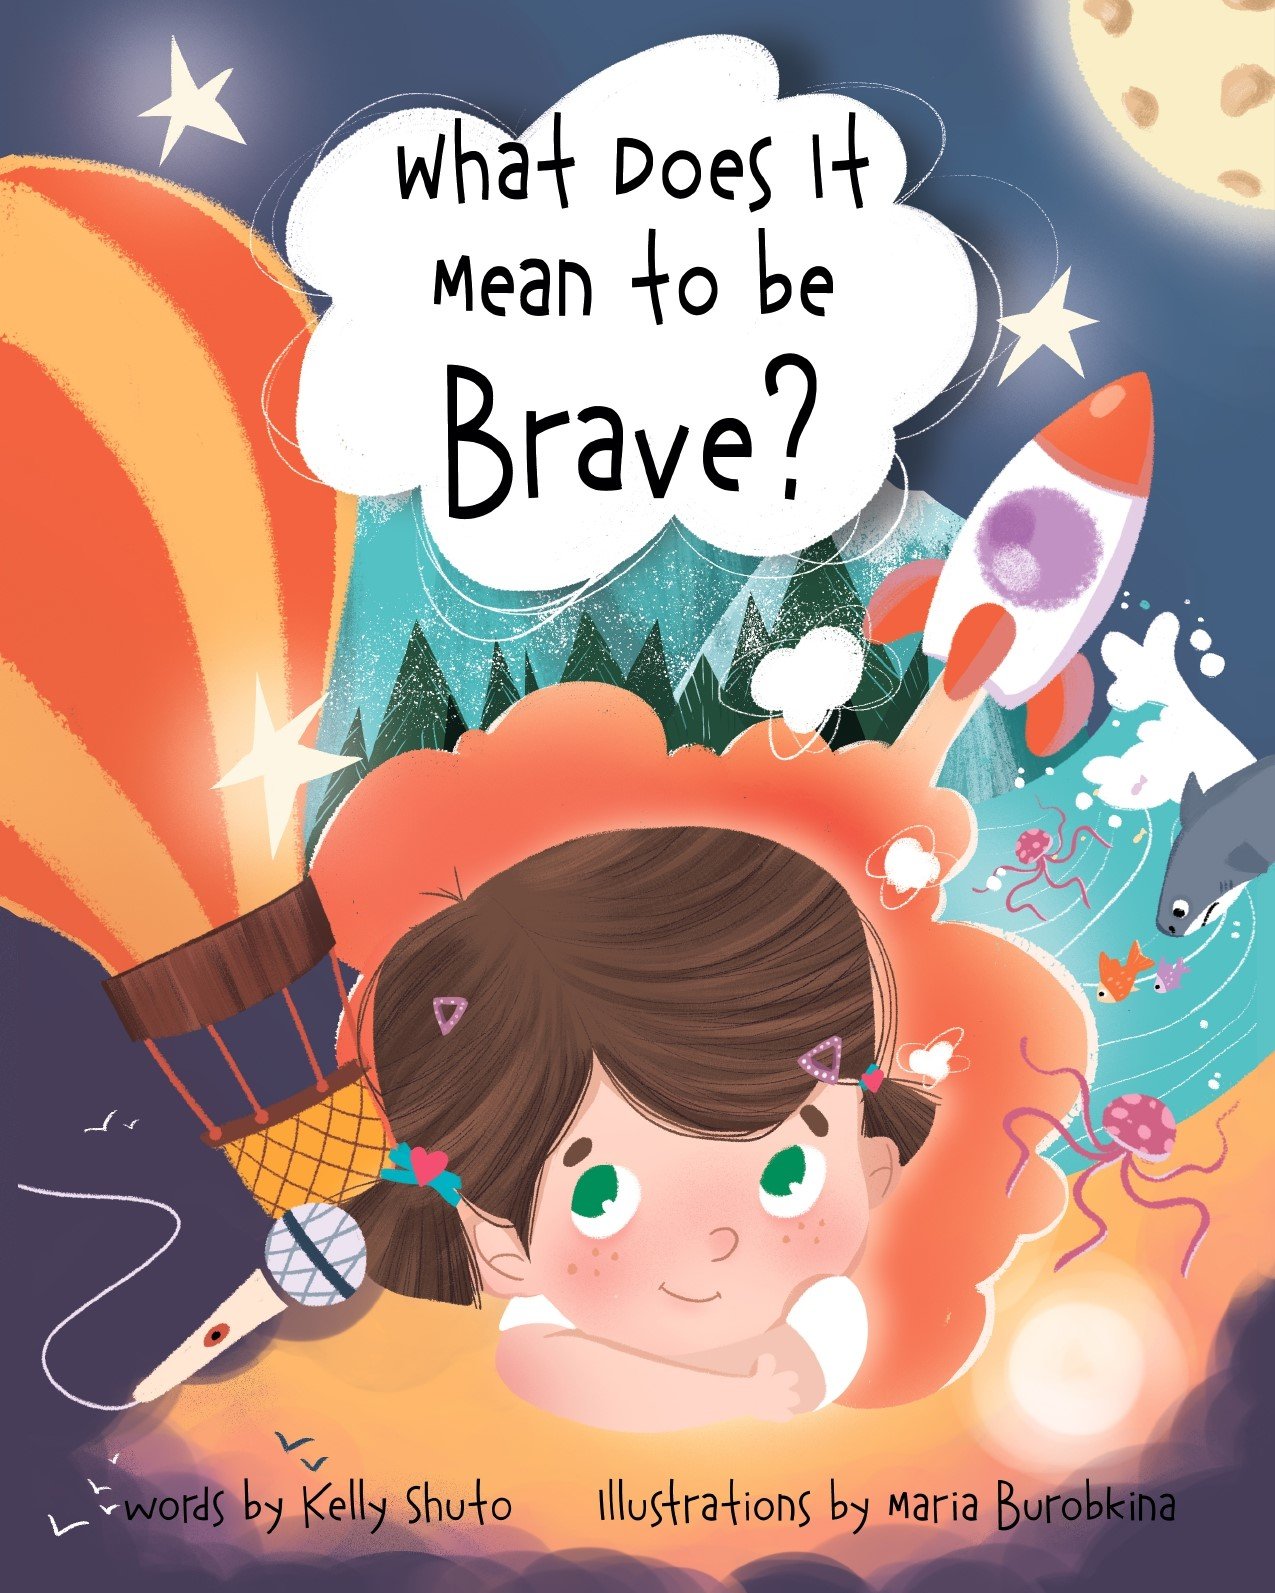 What Does it Mean to Be Brave? by Kelly Shuto